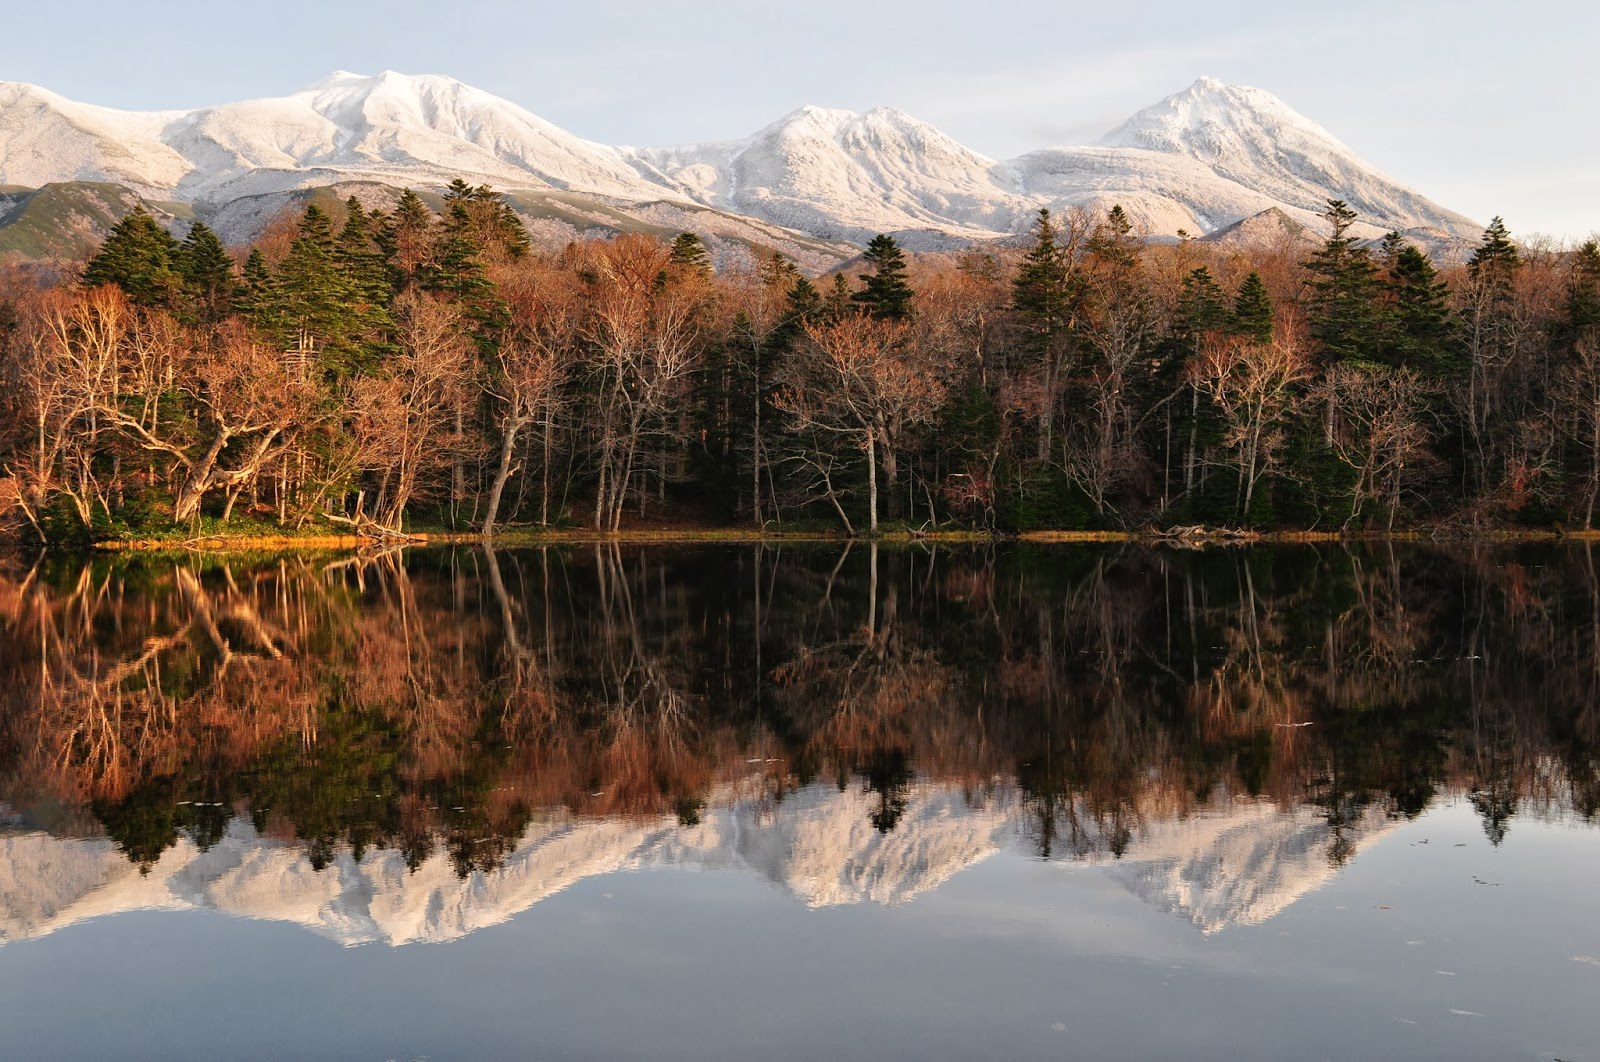 The snow-capped mountains of Shiretoko rising above the trees on the far side of a totally still lil tarn